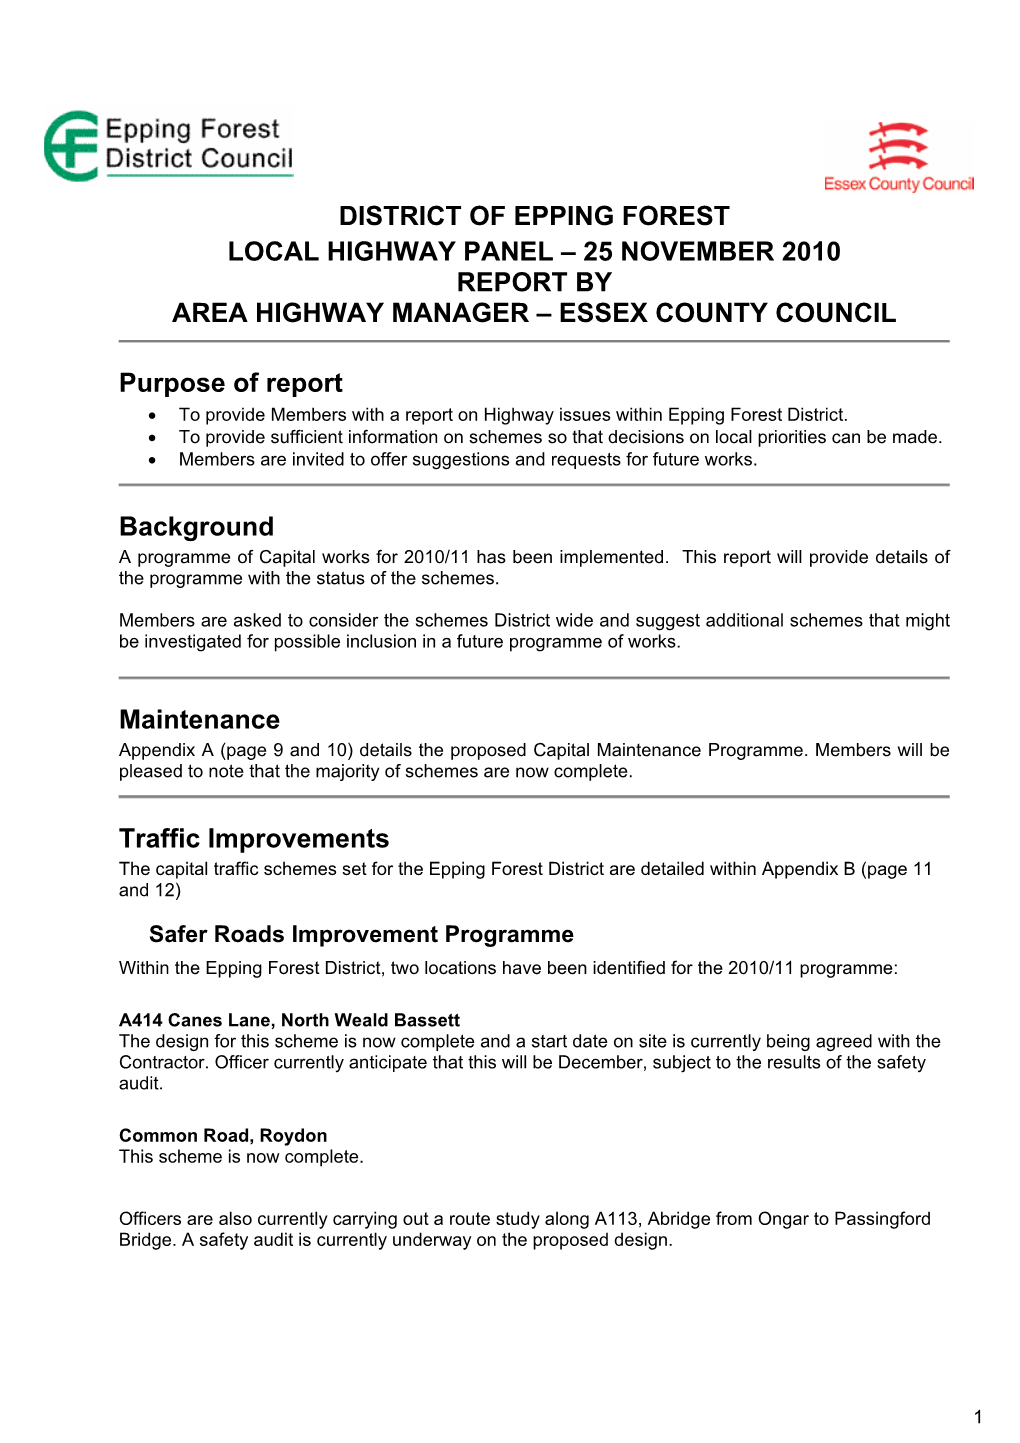 District of Epping Forest Local Highway Panel – 25 November 2010 Report by Area Highway Manager – Essex County Council